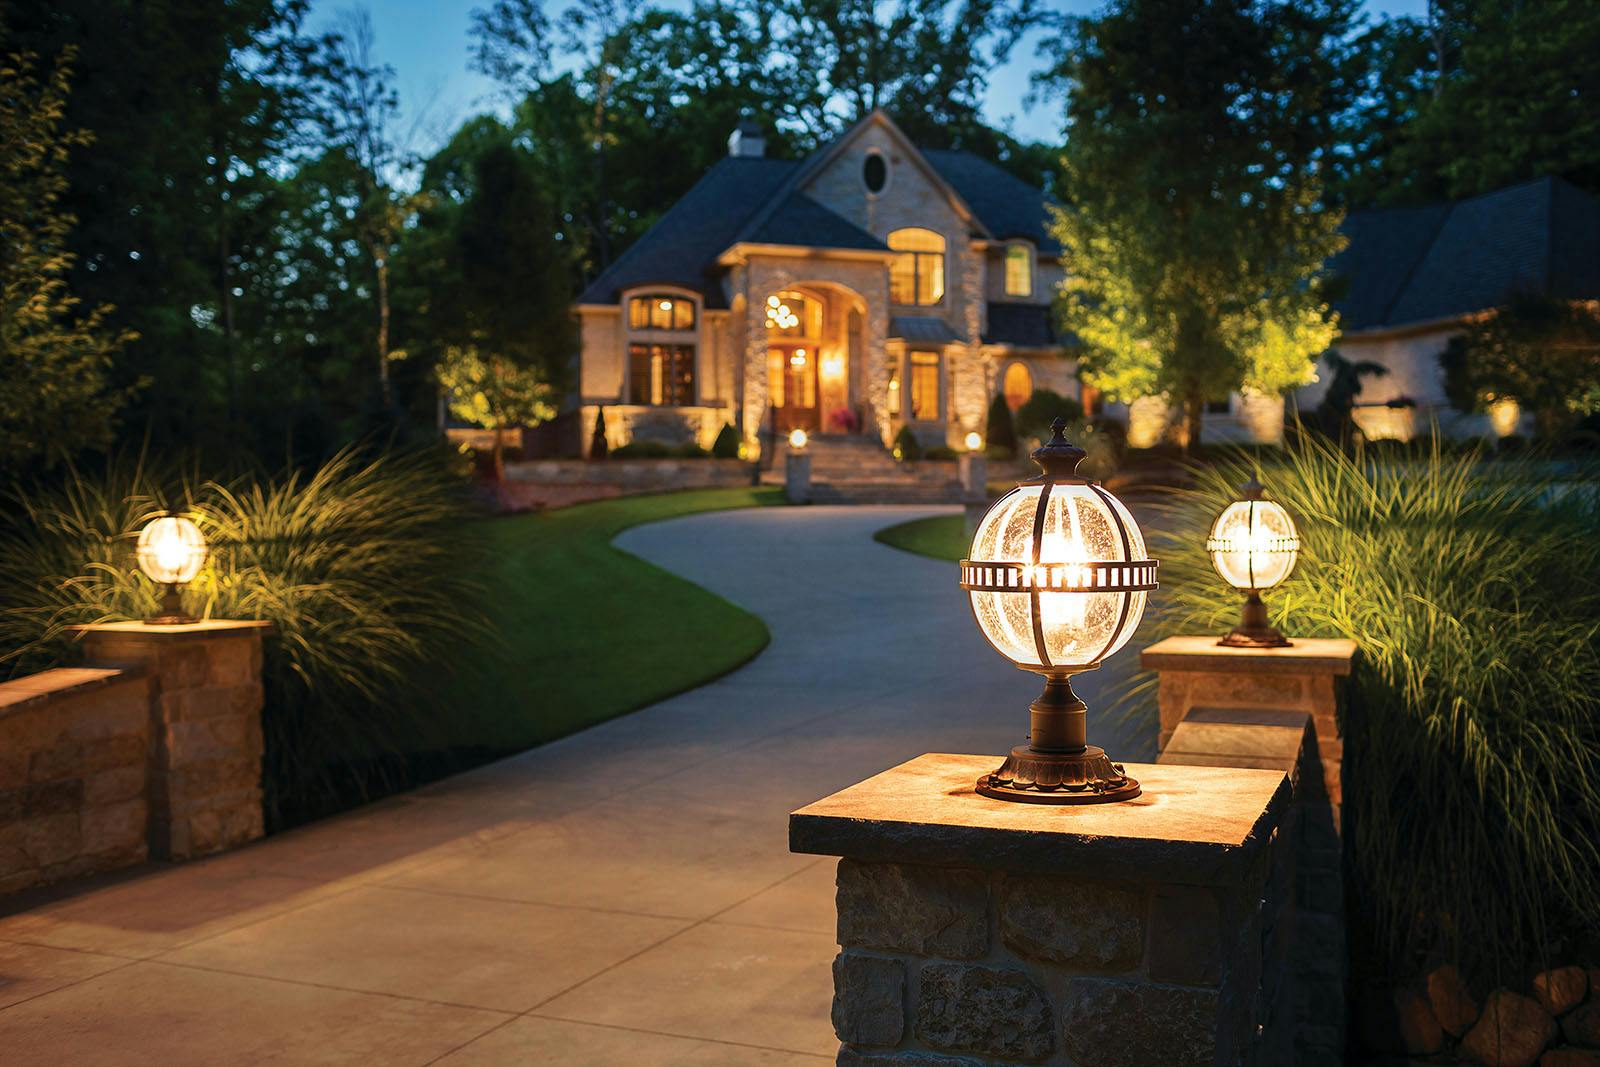 Night time driveway flanked by Halleron post lights and an illuminated home in the background